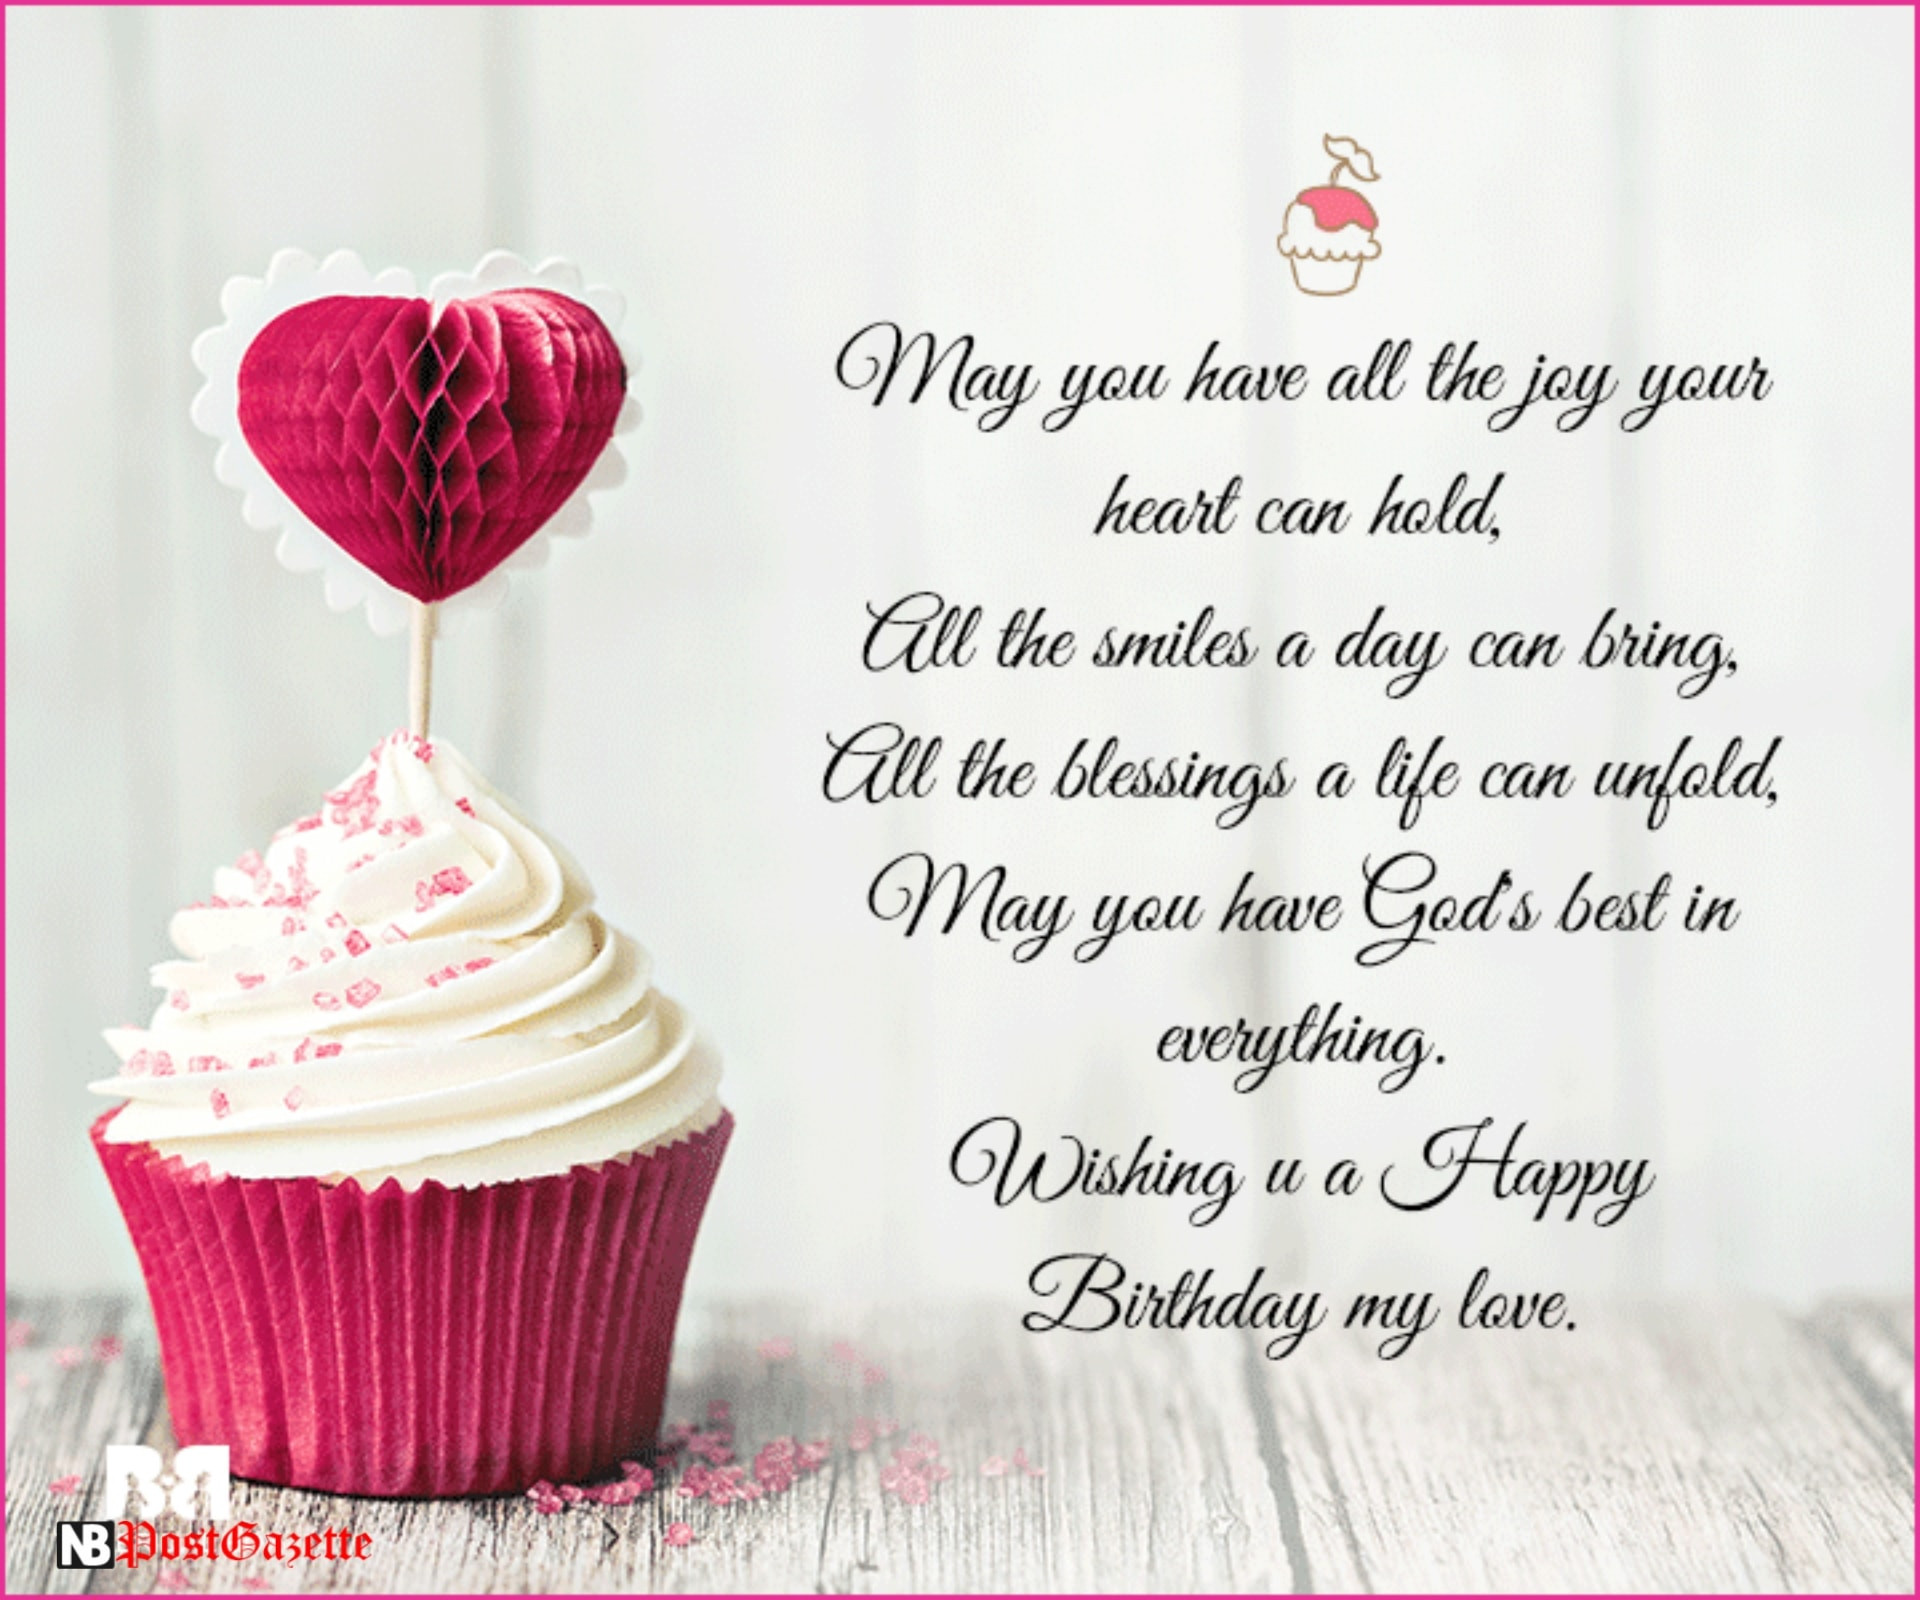 Wishing You A Happy Birthday Quotes
 Top Best Happy Birthday Wishes SMS Quotes & Text Messages